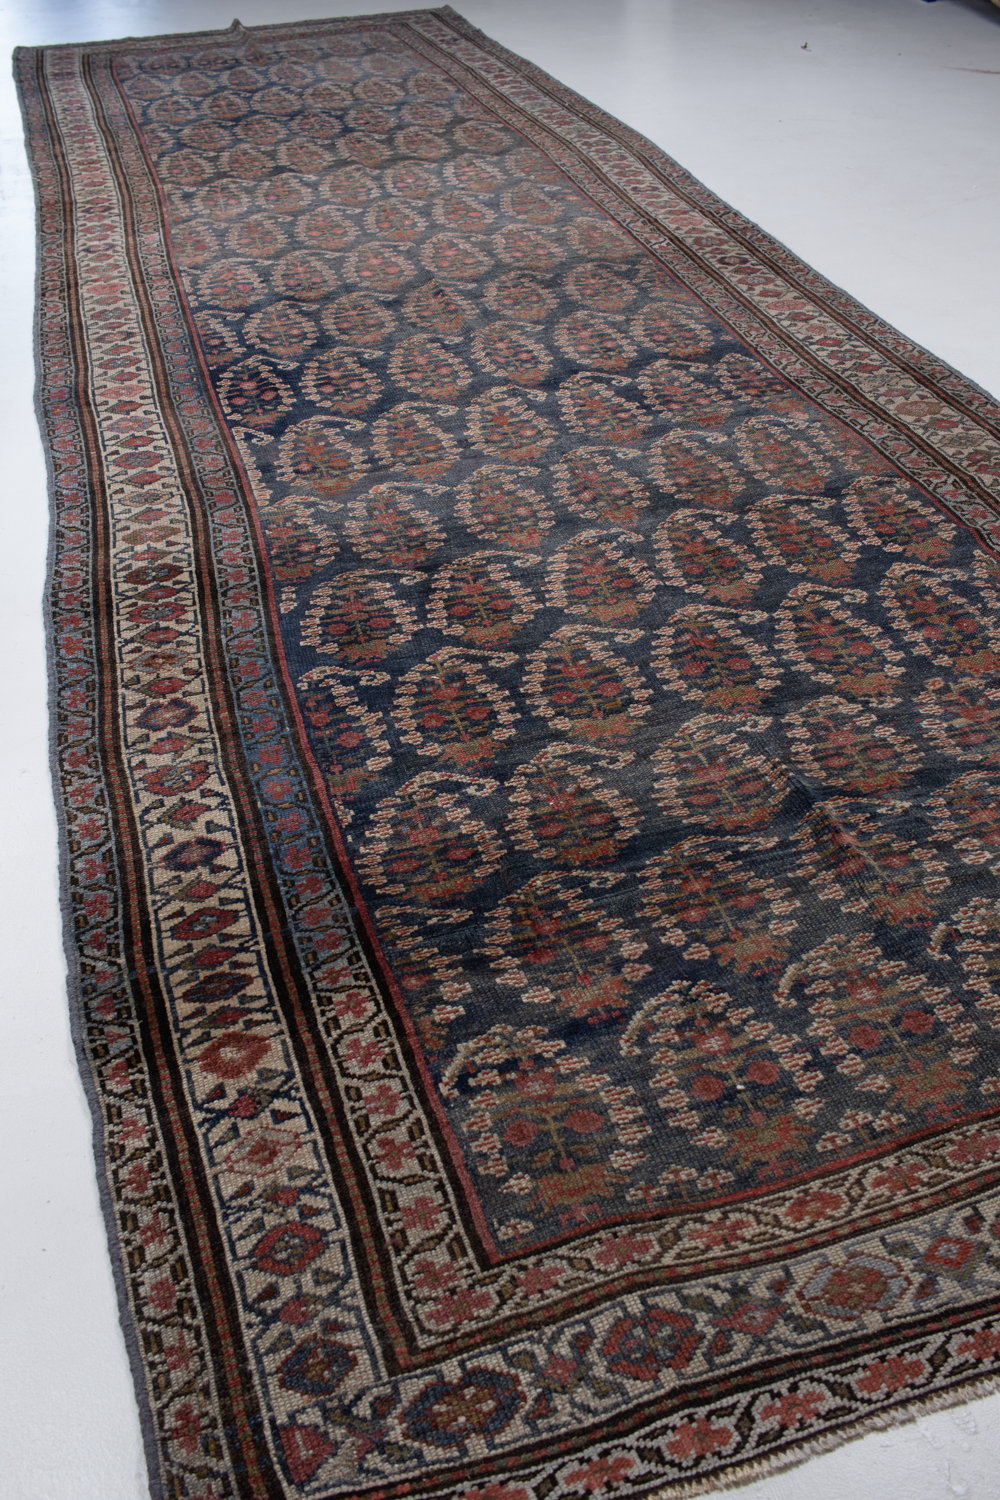 Antique Persian Malayer Gallery Runner Rug